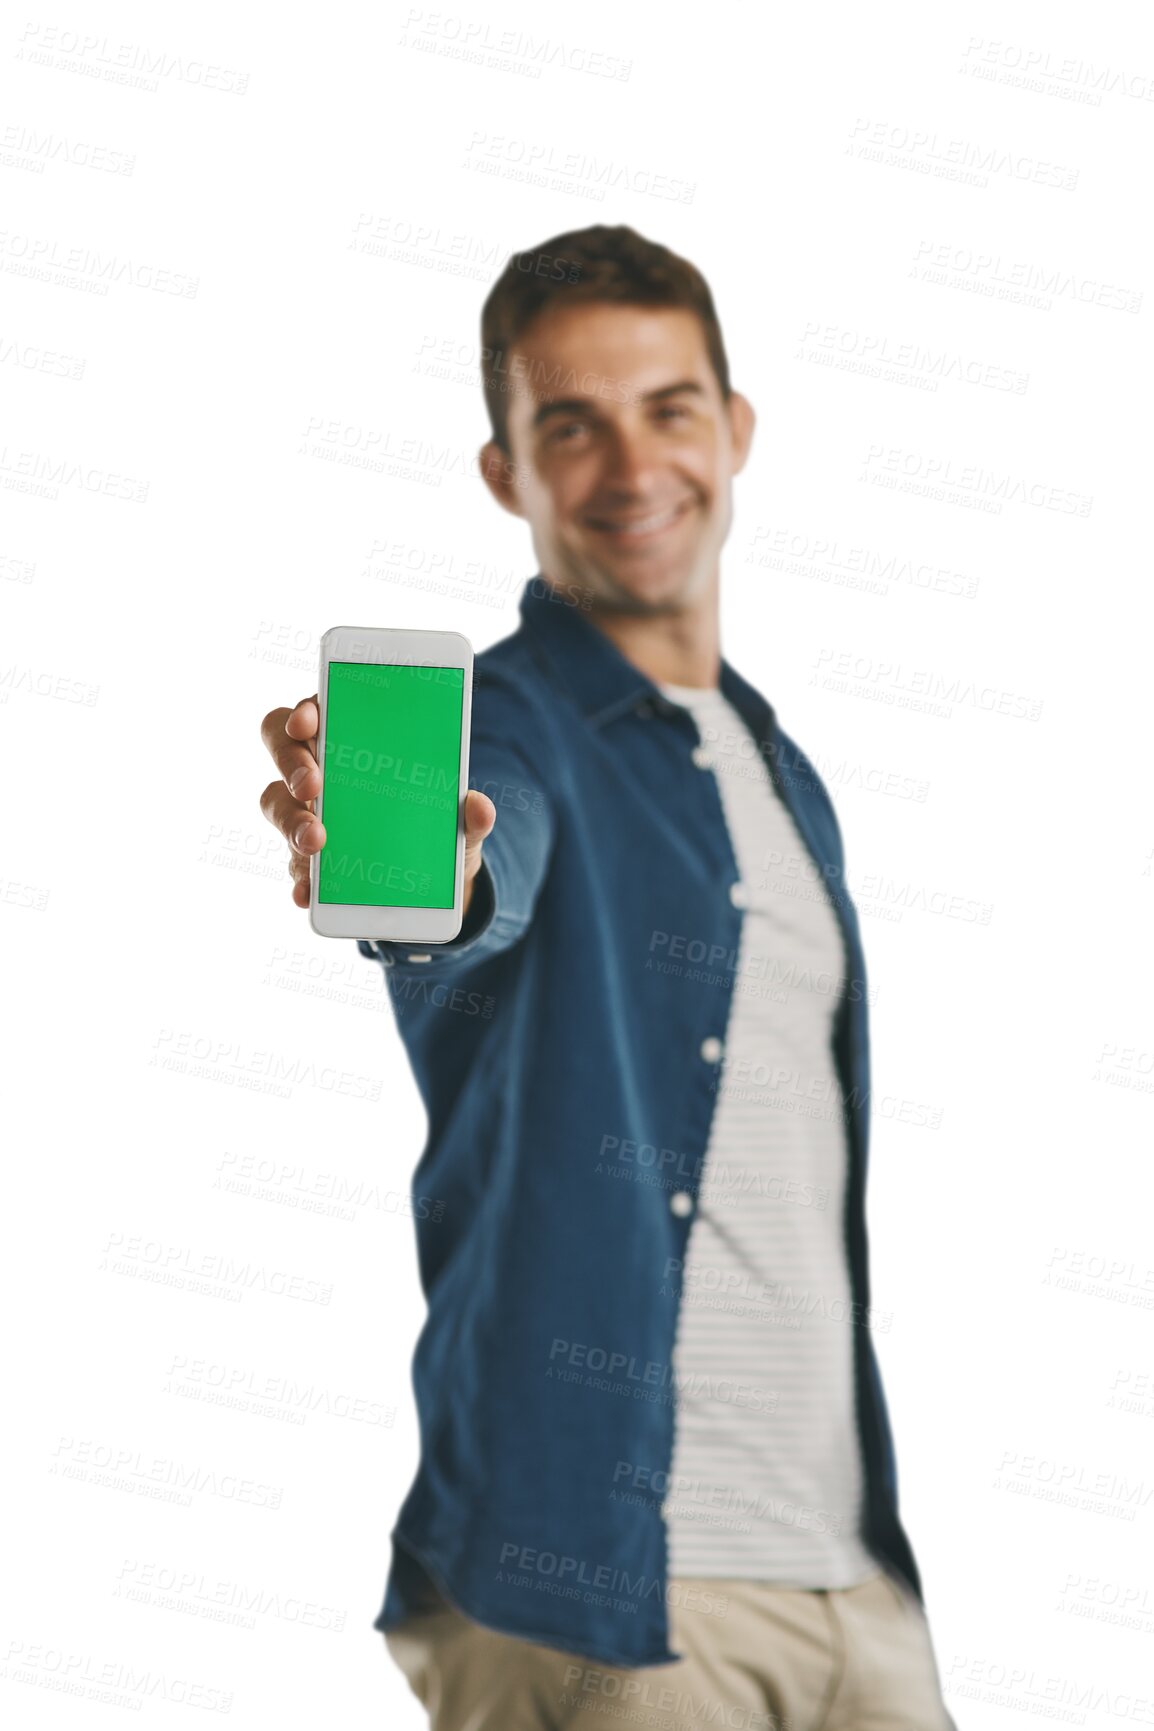 Buy stock photo Portrait, green screen and man show smartphone, hand and isolated on a transparent png background. Phone, chroma key and happy person with app for marketing, social media or mockup space on display